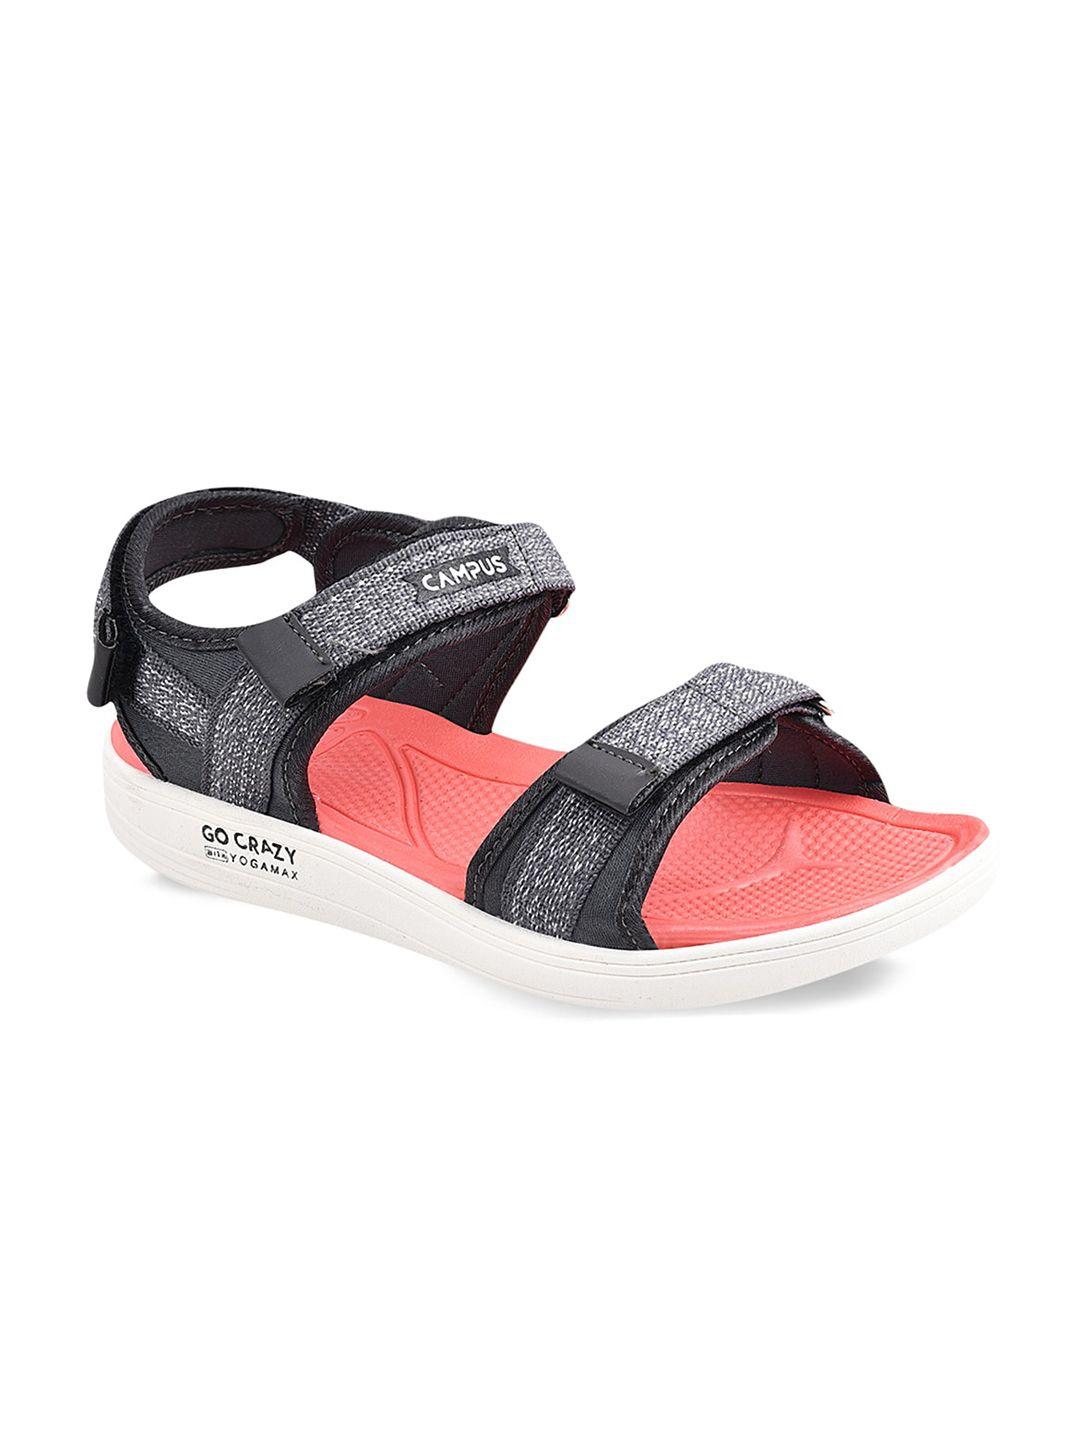 campus-women-grey-&-peach-patterned-sports-sandals